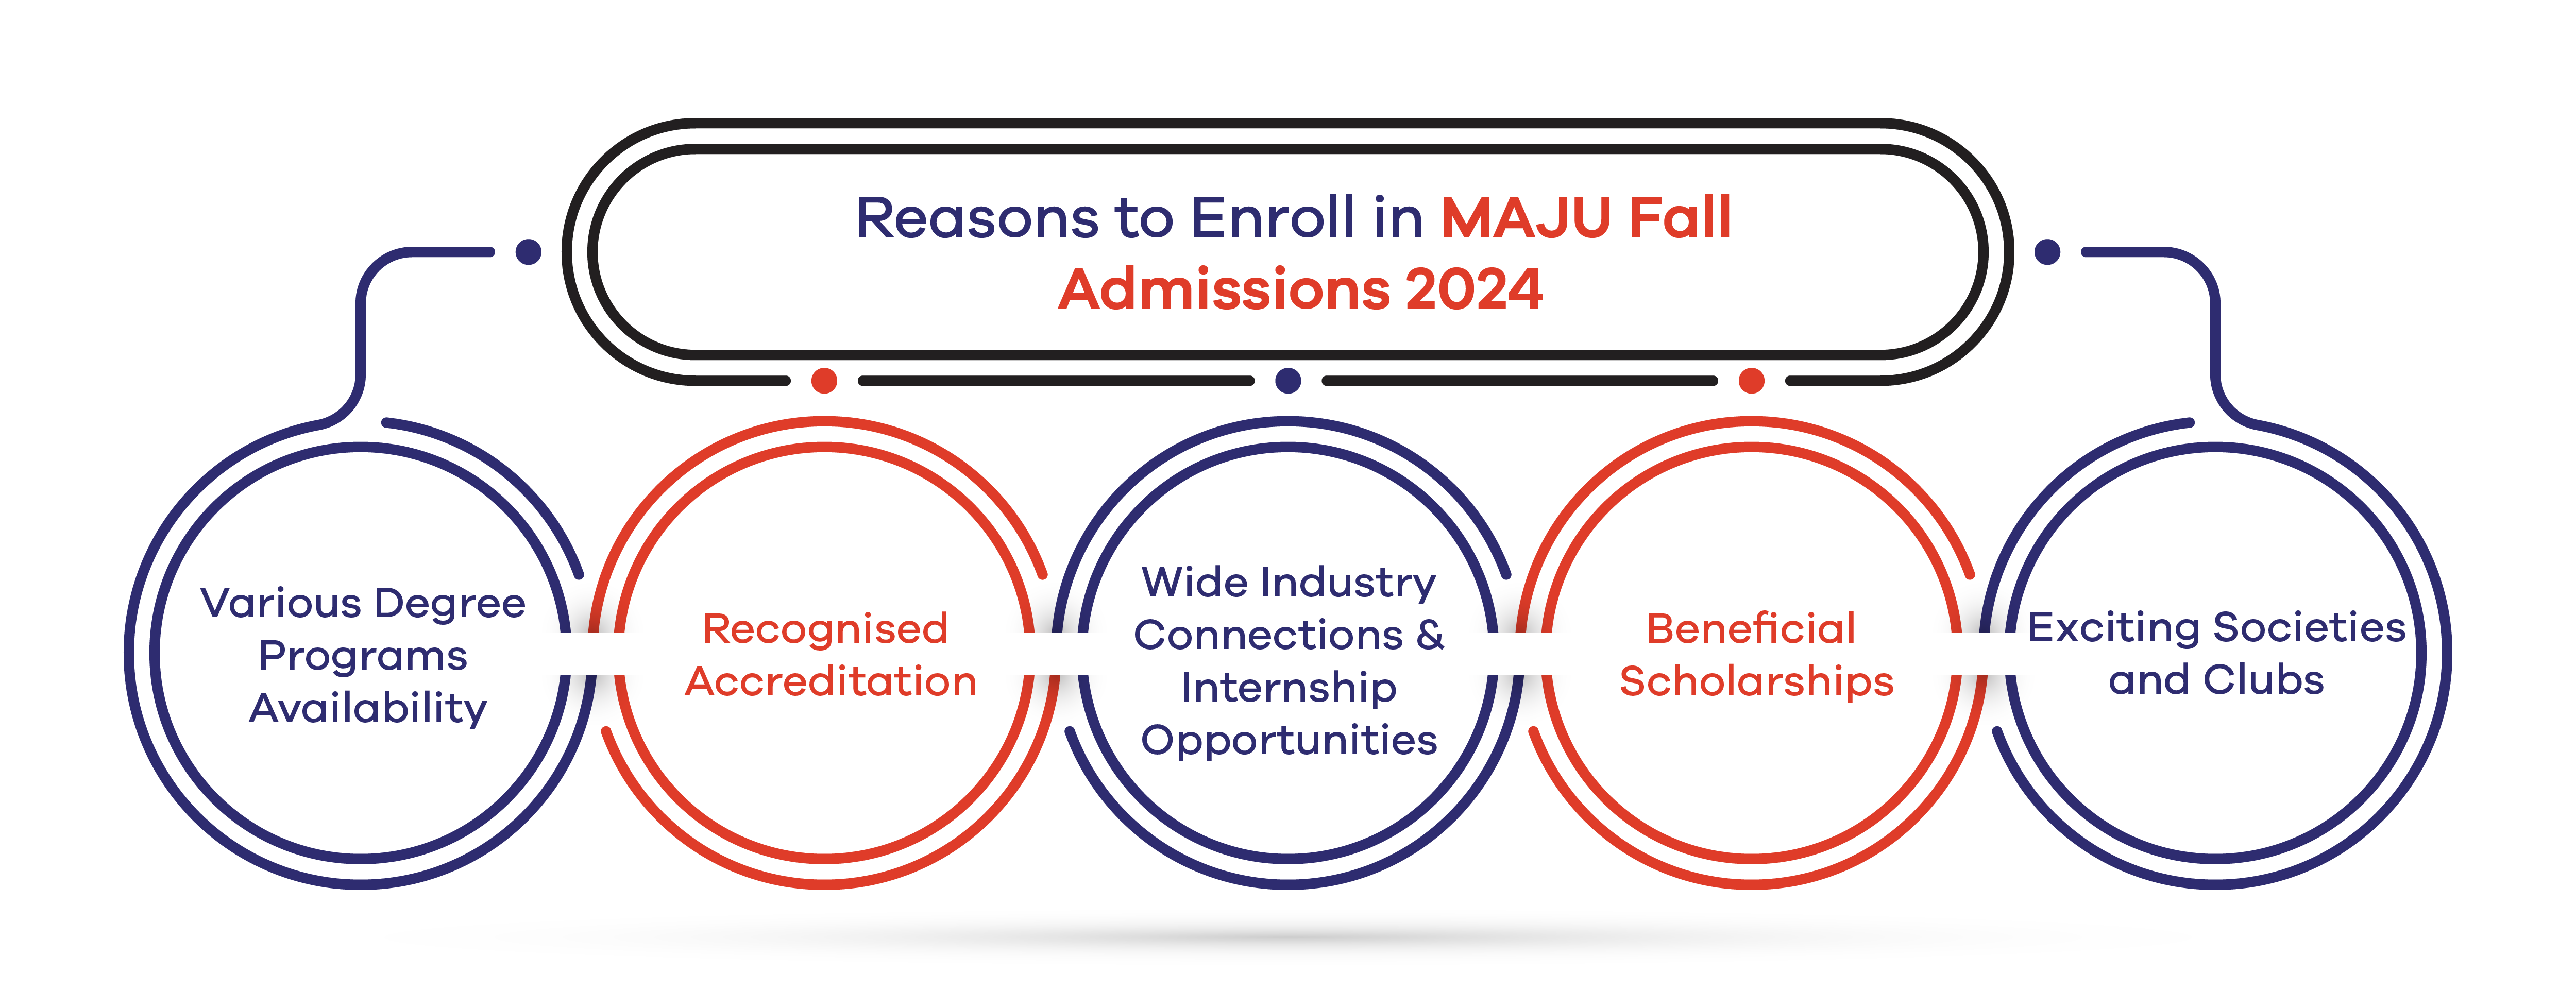 Reasons to Enroll in MAJU Fall Admissions 2024